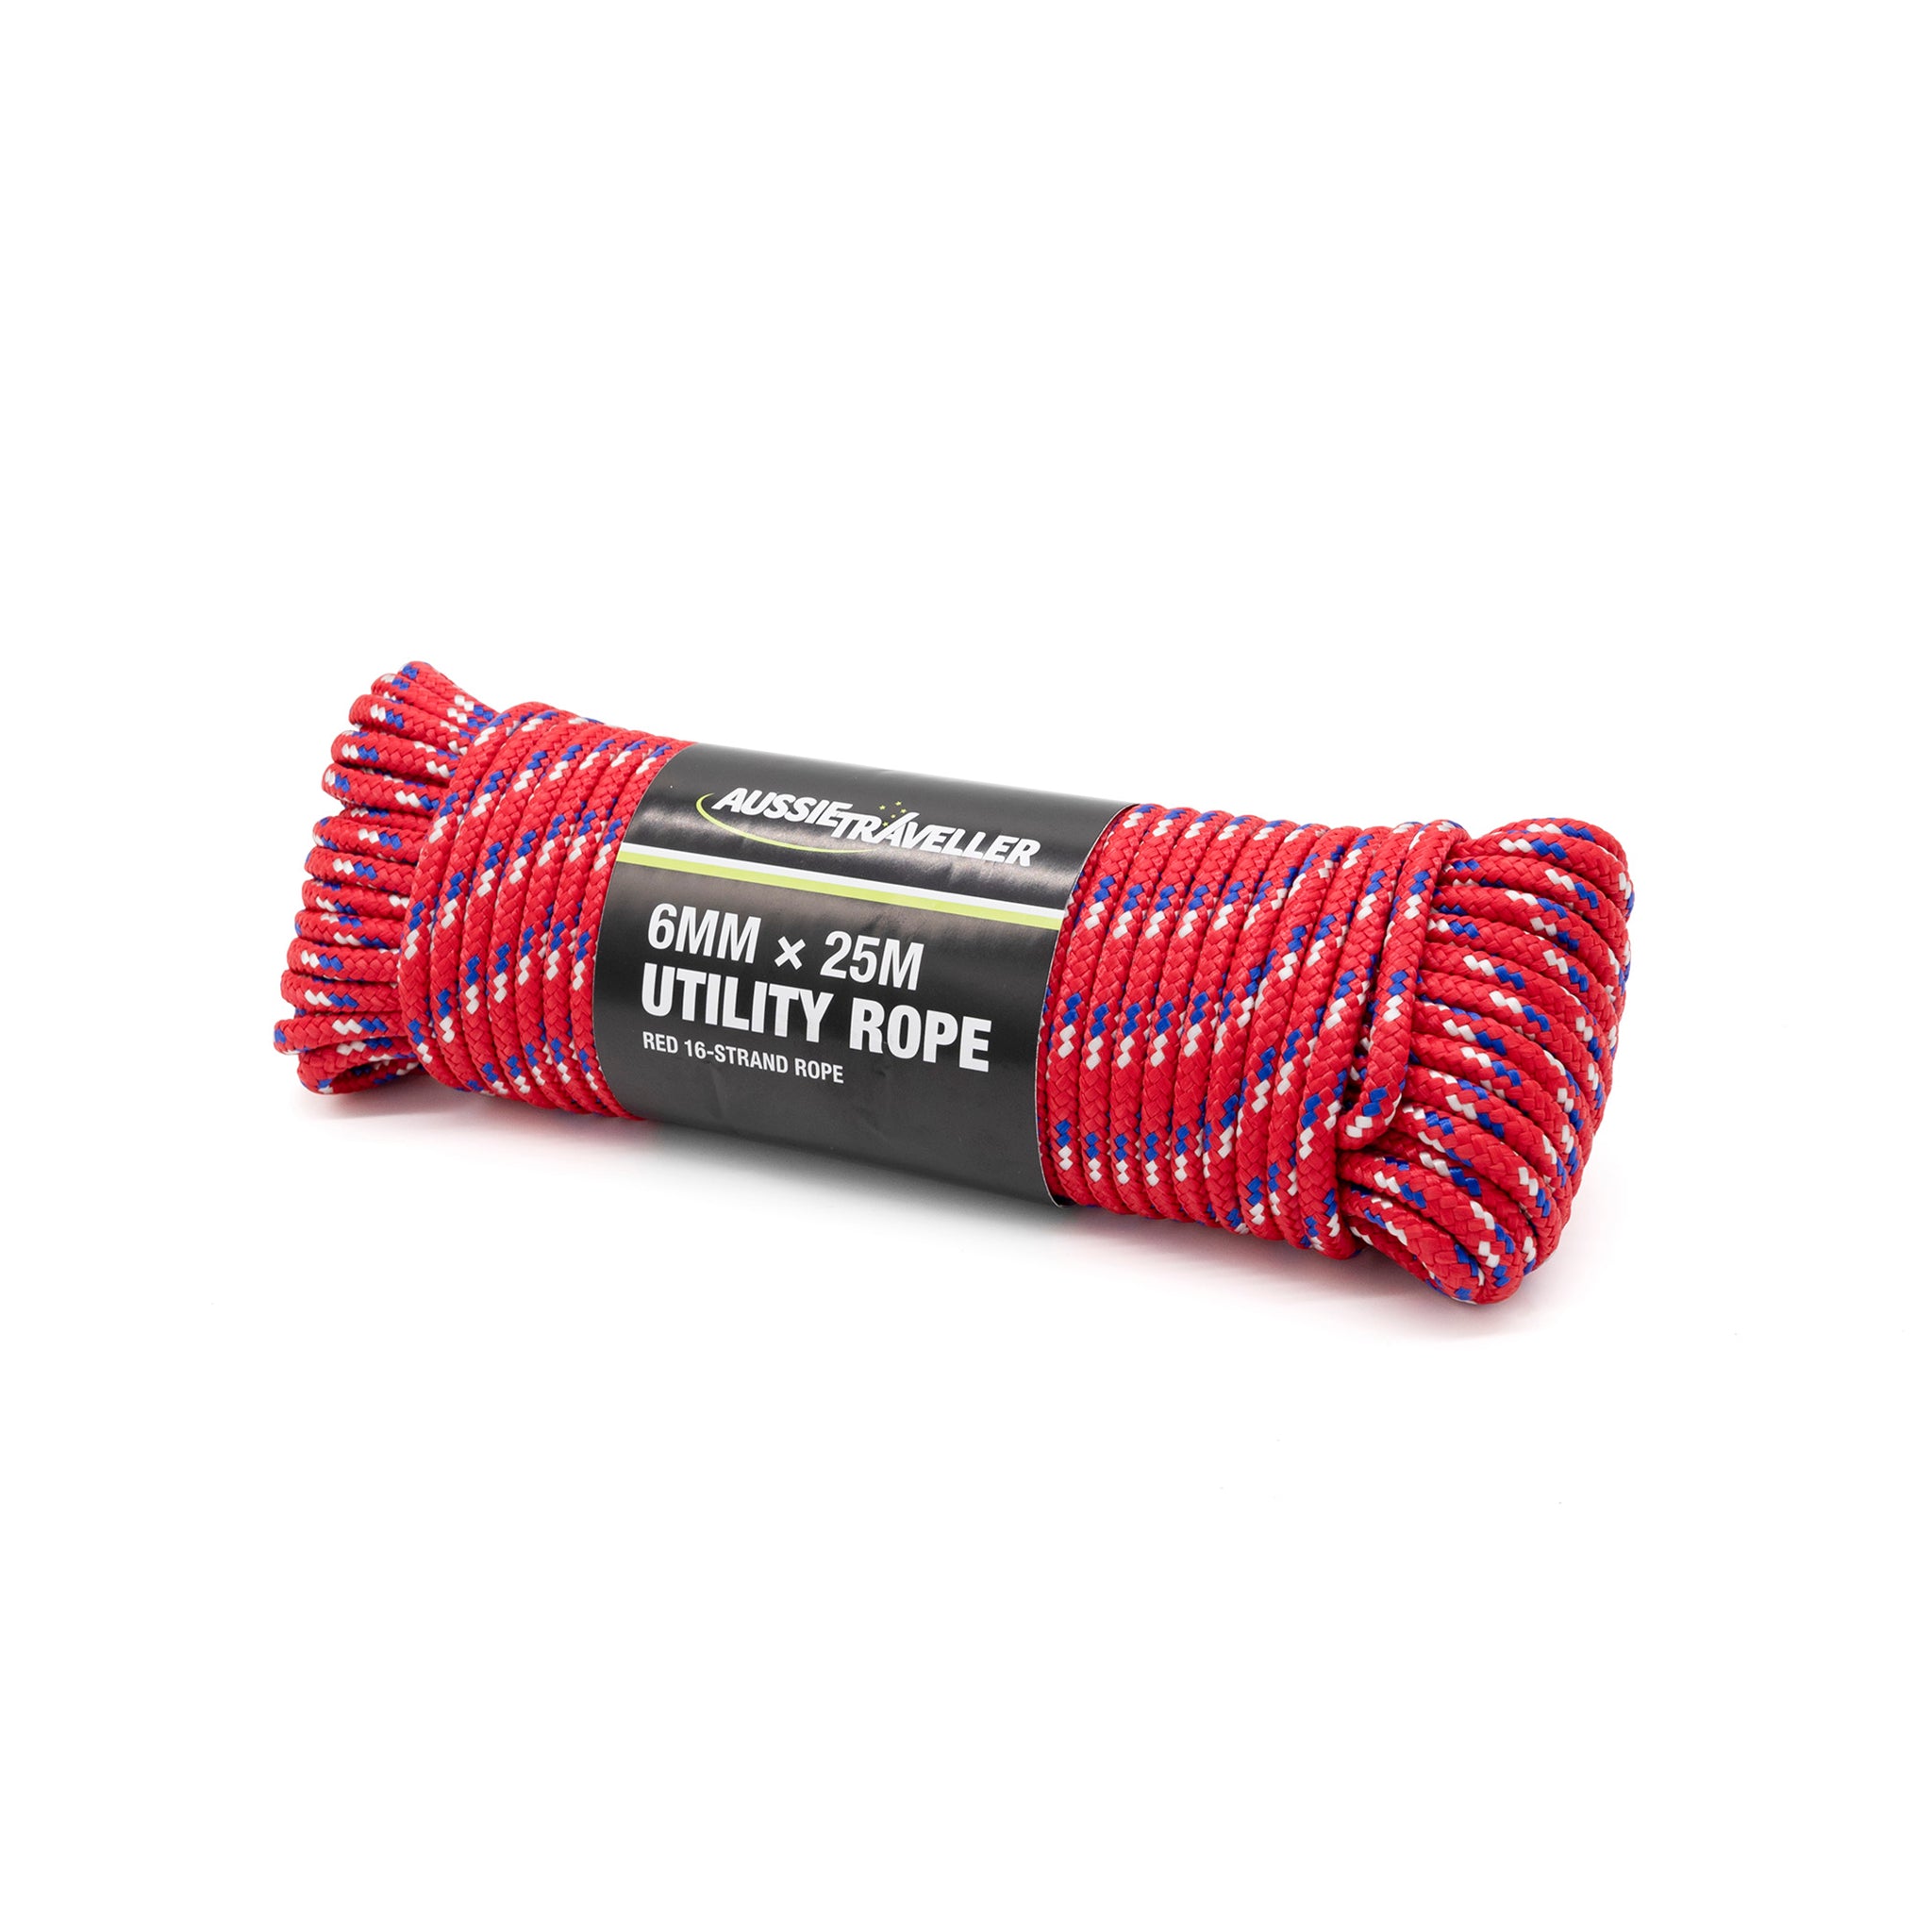 Utility Rope 6mm x 25m Bundle - Red